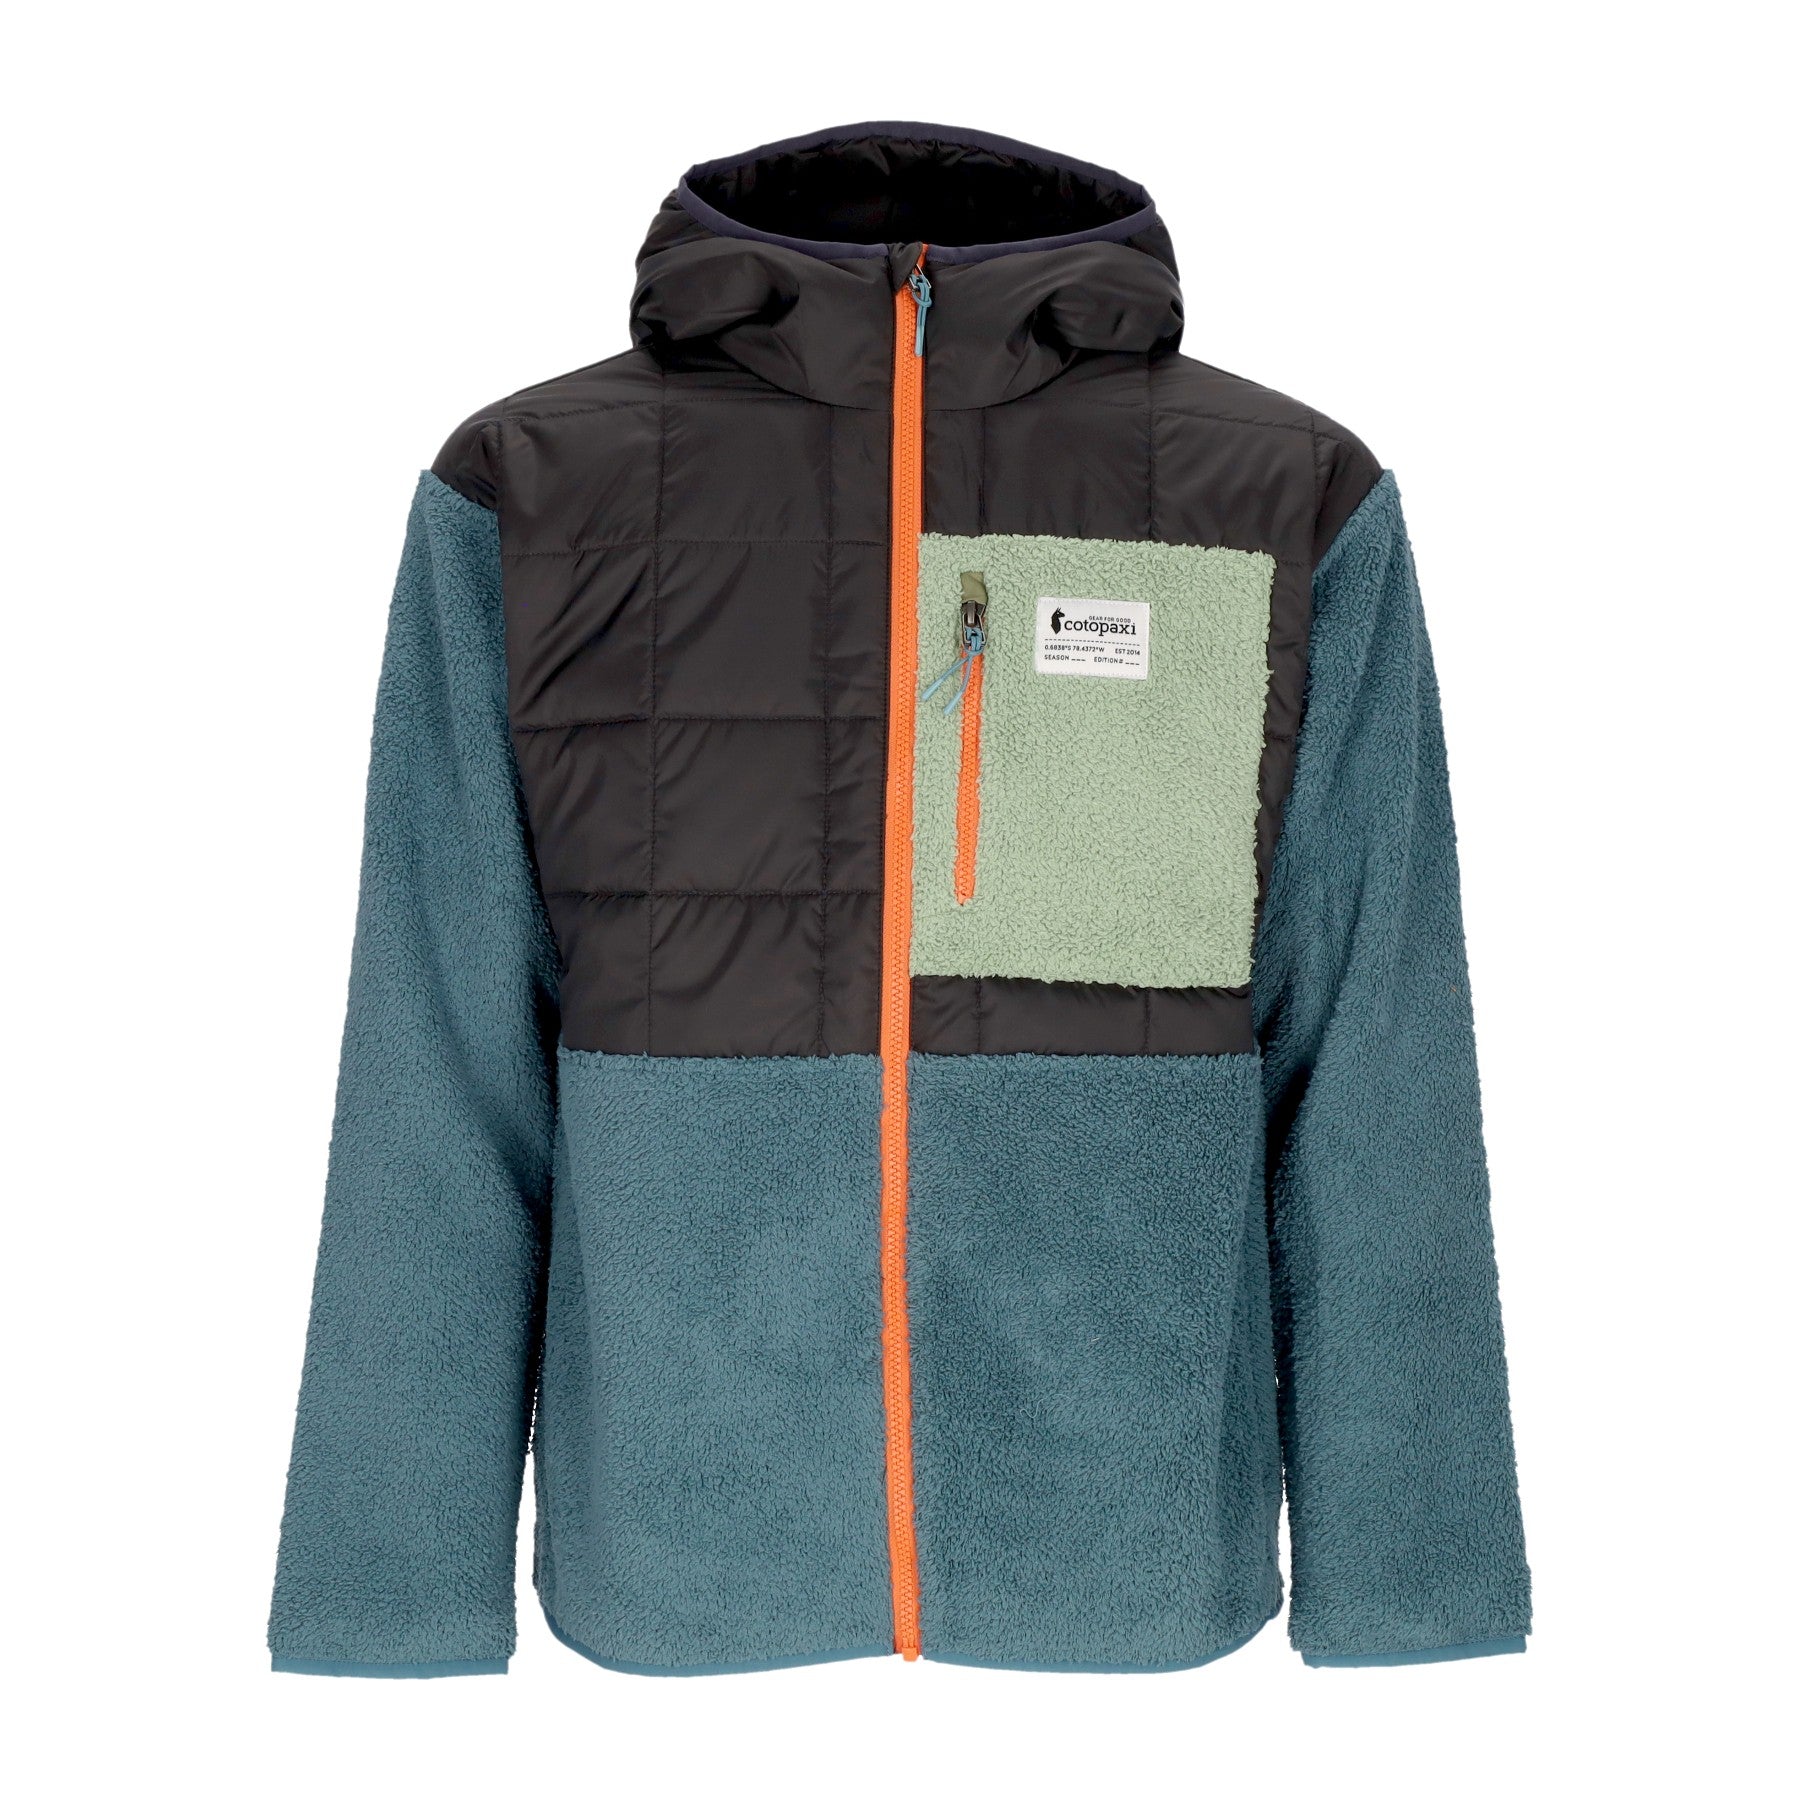 Cotopaxi, Orsetto Uomo Trico Hybrid Hooded Jacket, Graphite/blue Spruce